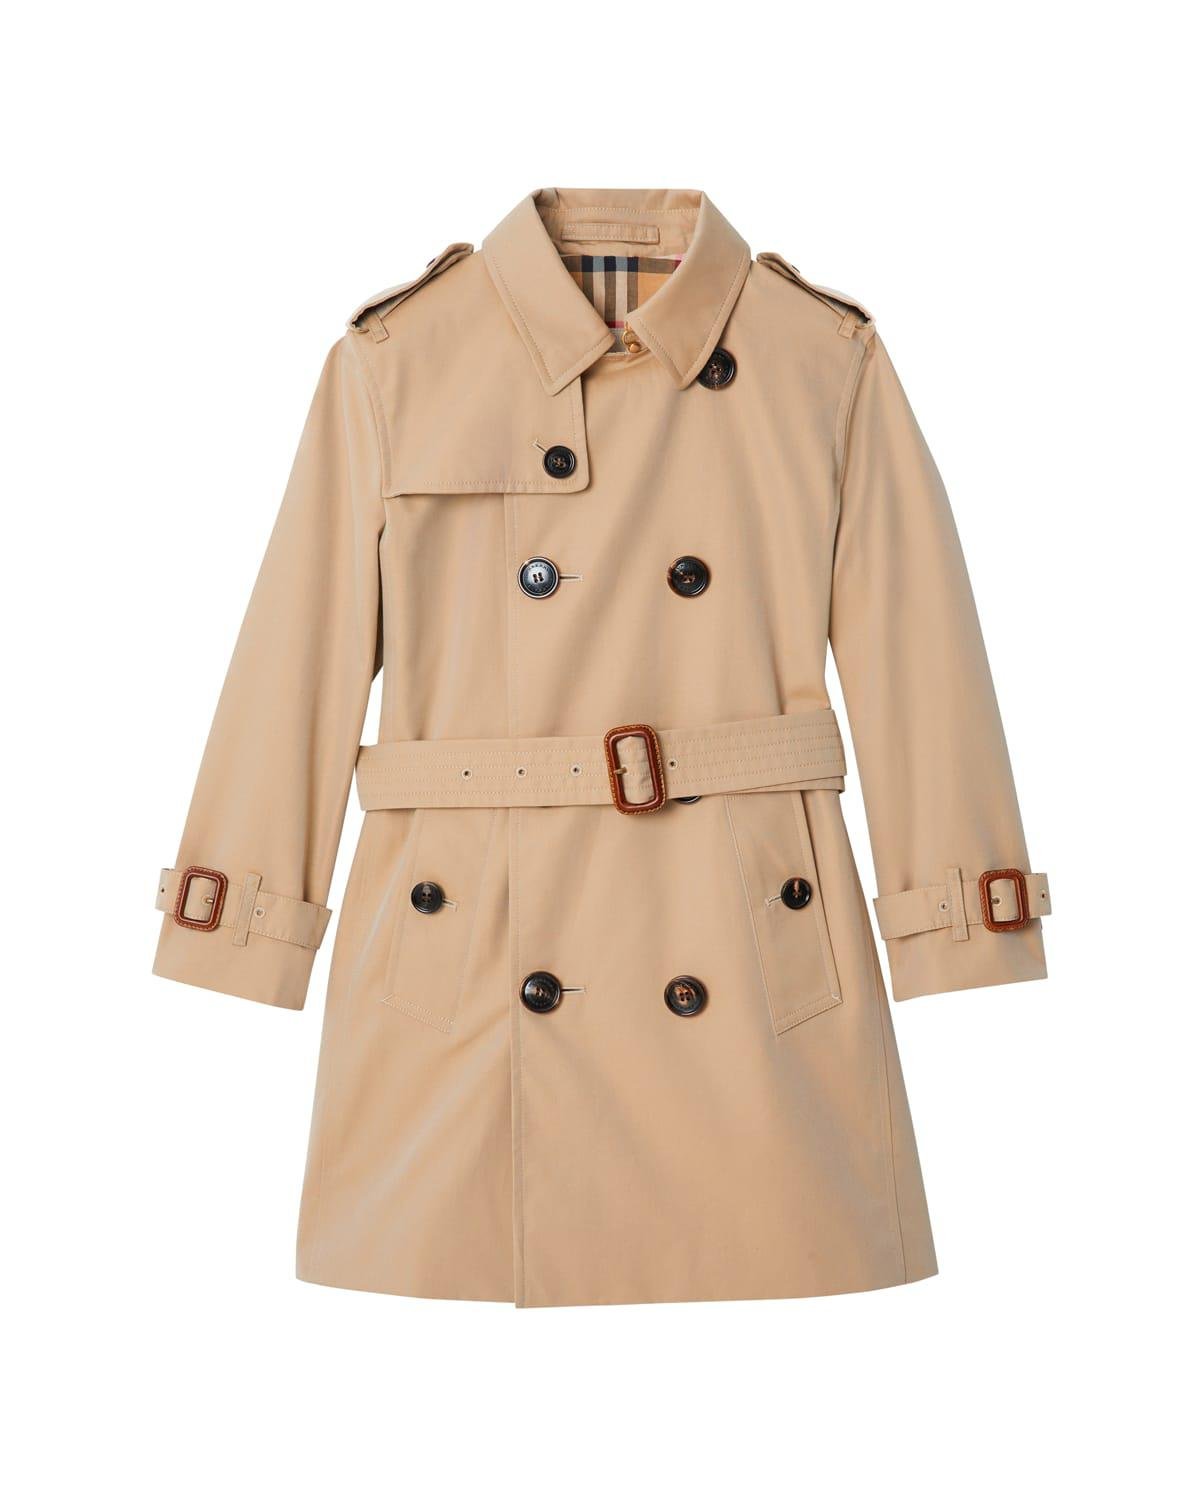 Mayfair Collared Trench Coat, Size 3-14 by BURBERRY